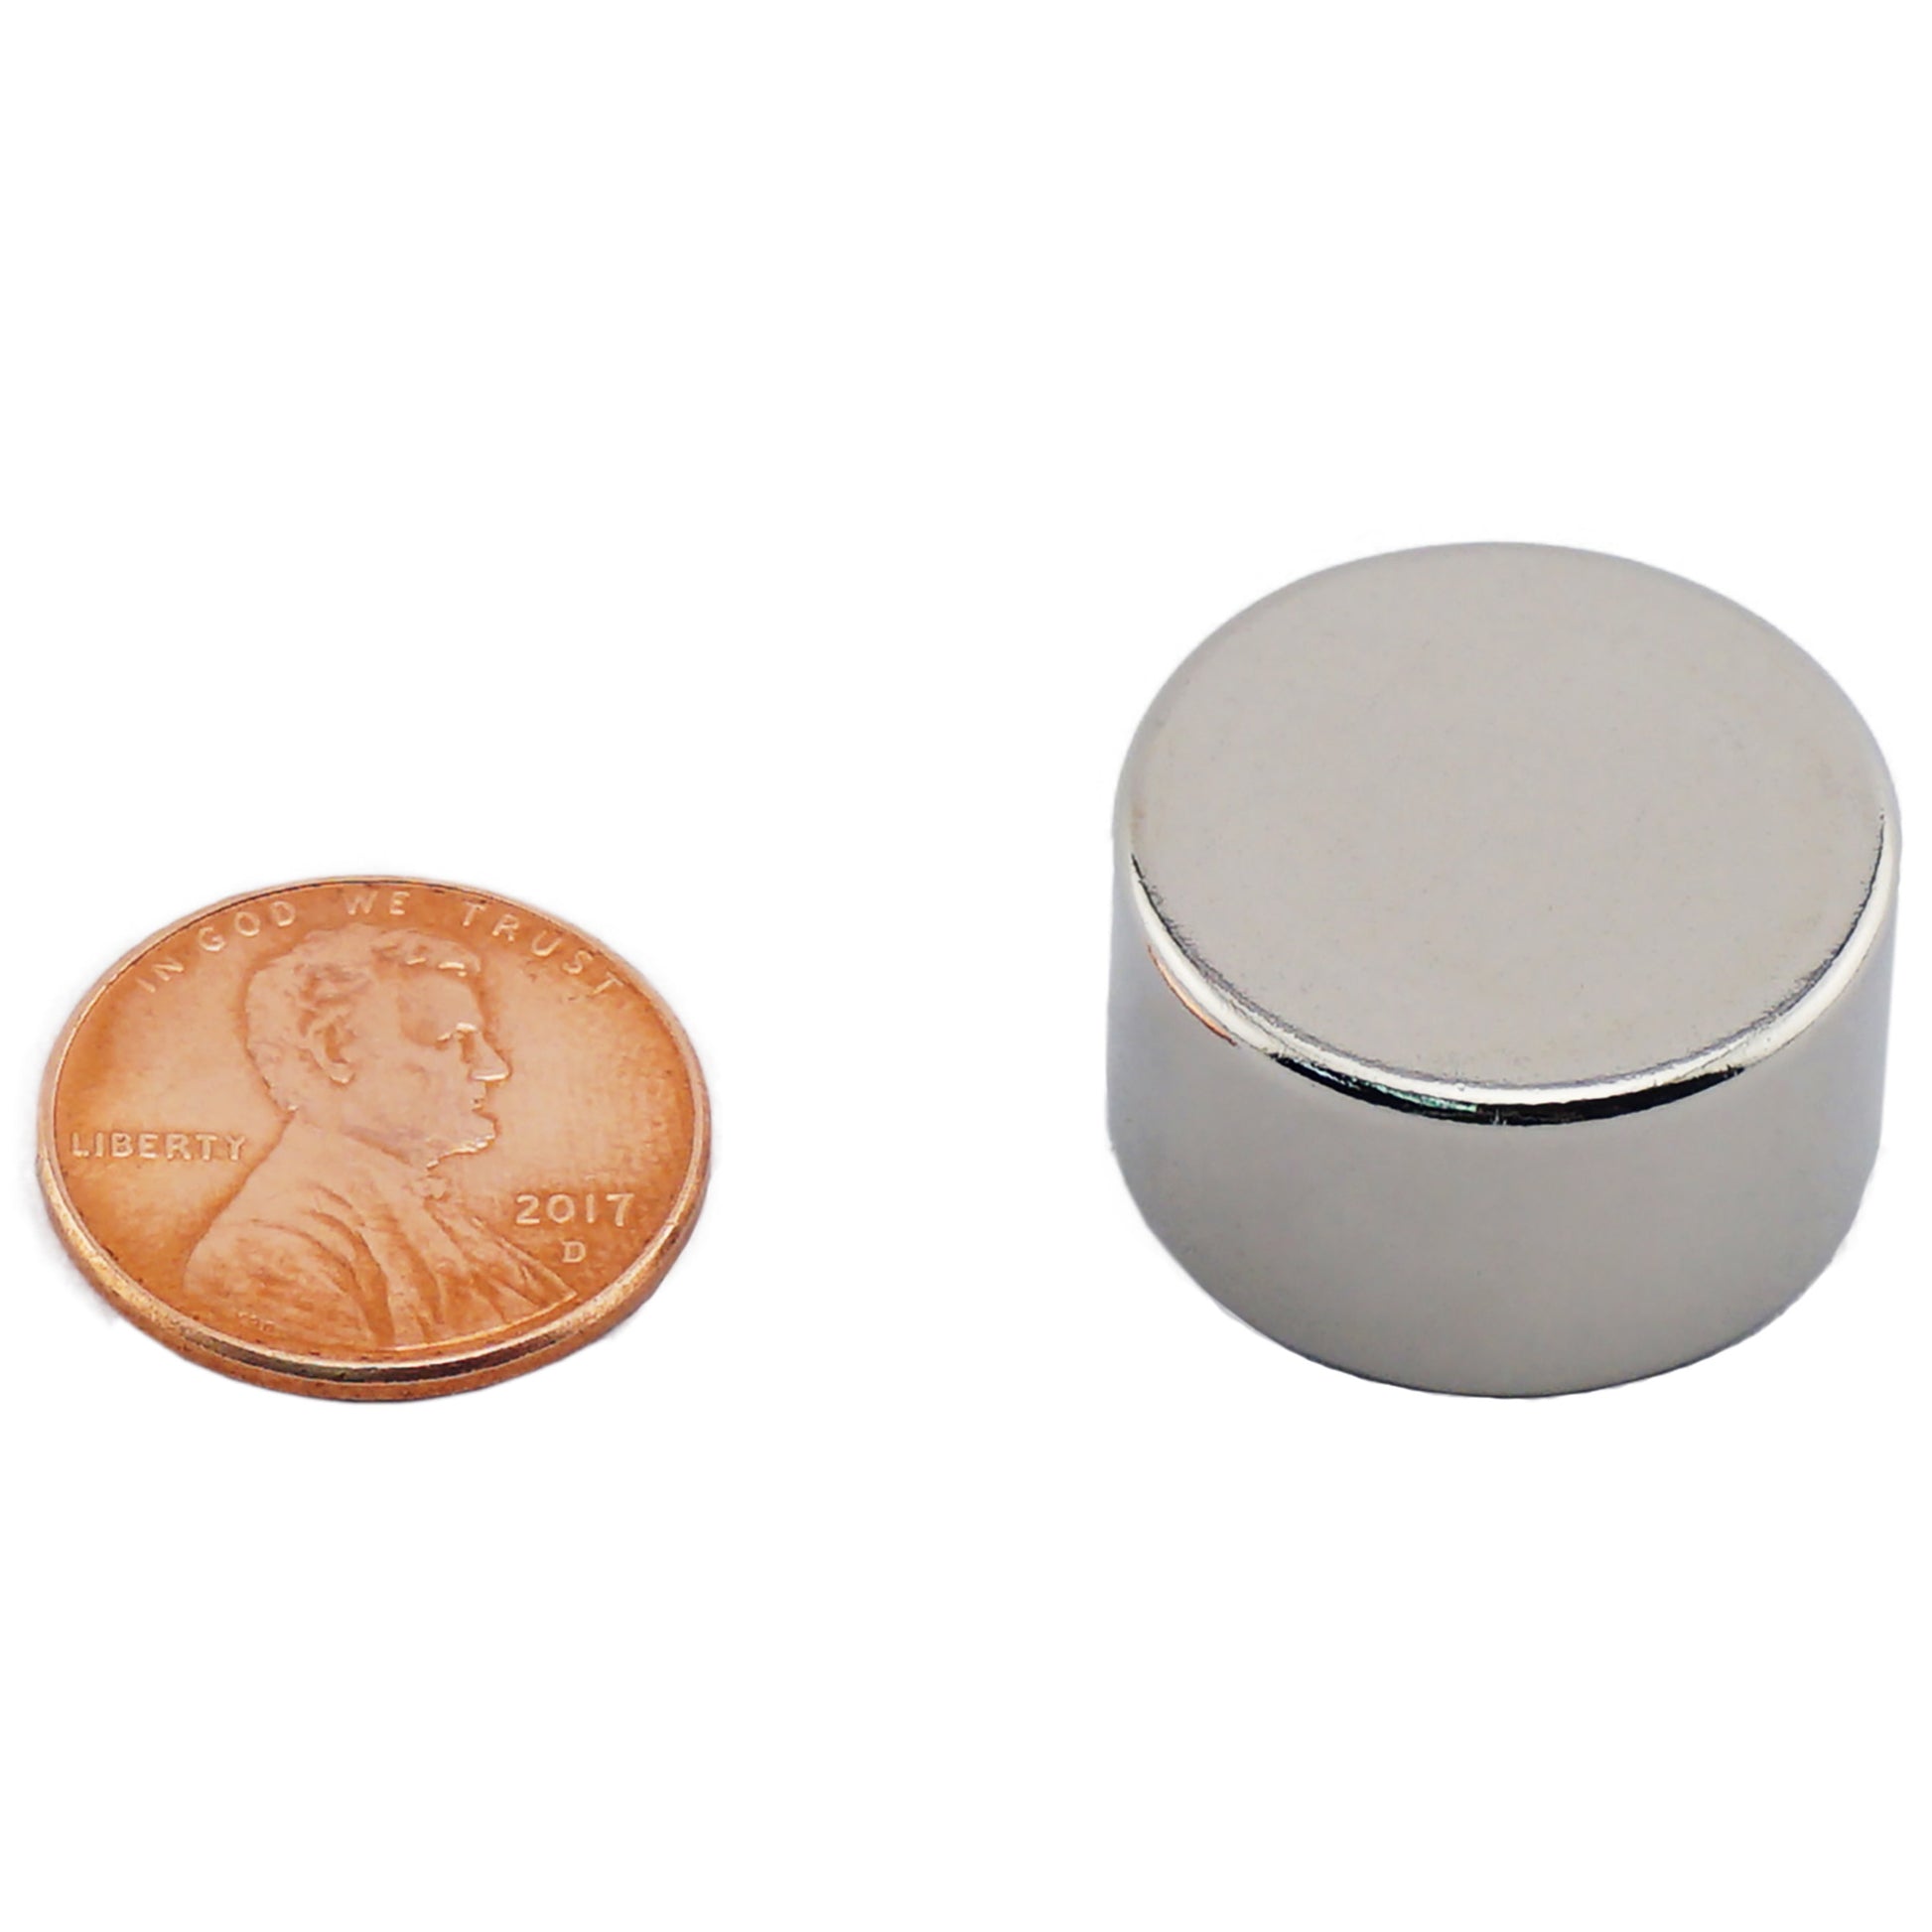 Load image into Gallery viewer, ND008710N Neodymium Disc Magnet - Compared to Penny for Size Reference